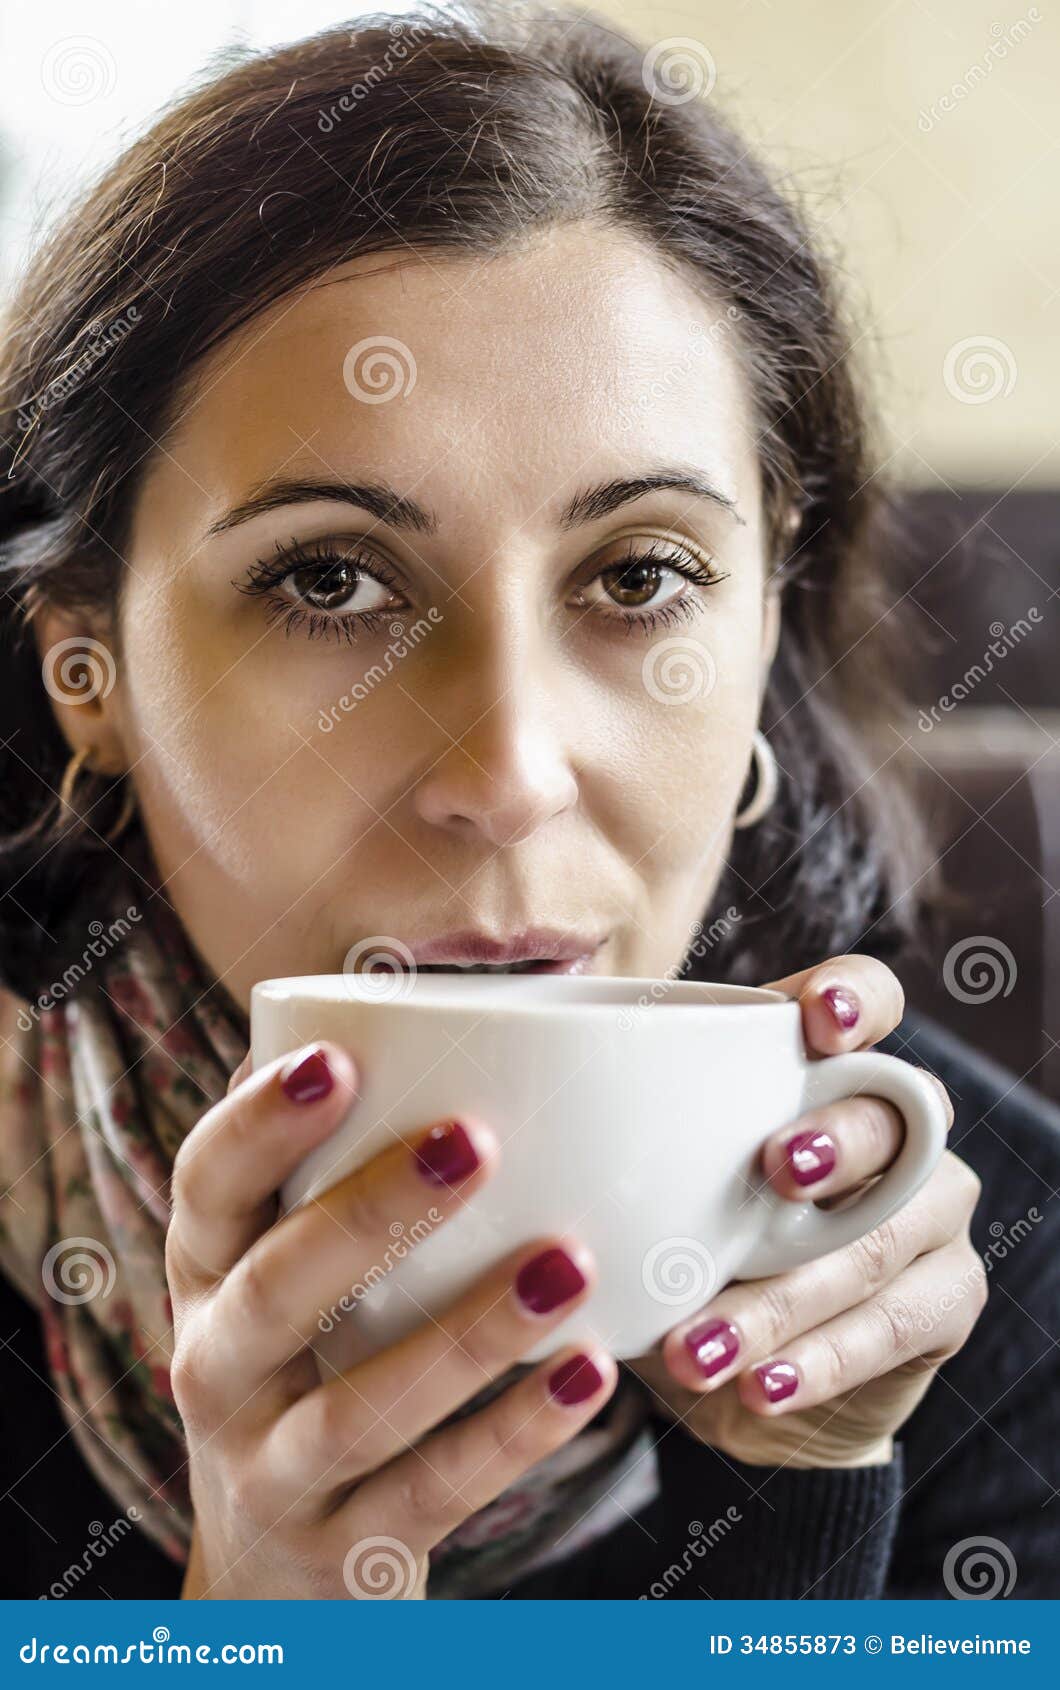 Woman Holding Cup of Coffee Stock Image - Image of elegant, caucasian ...